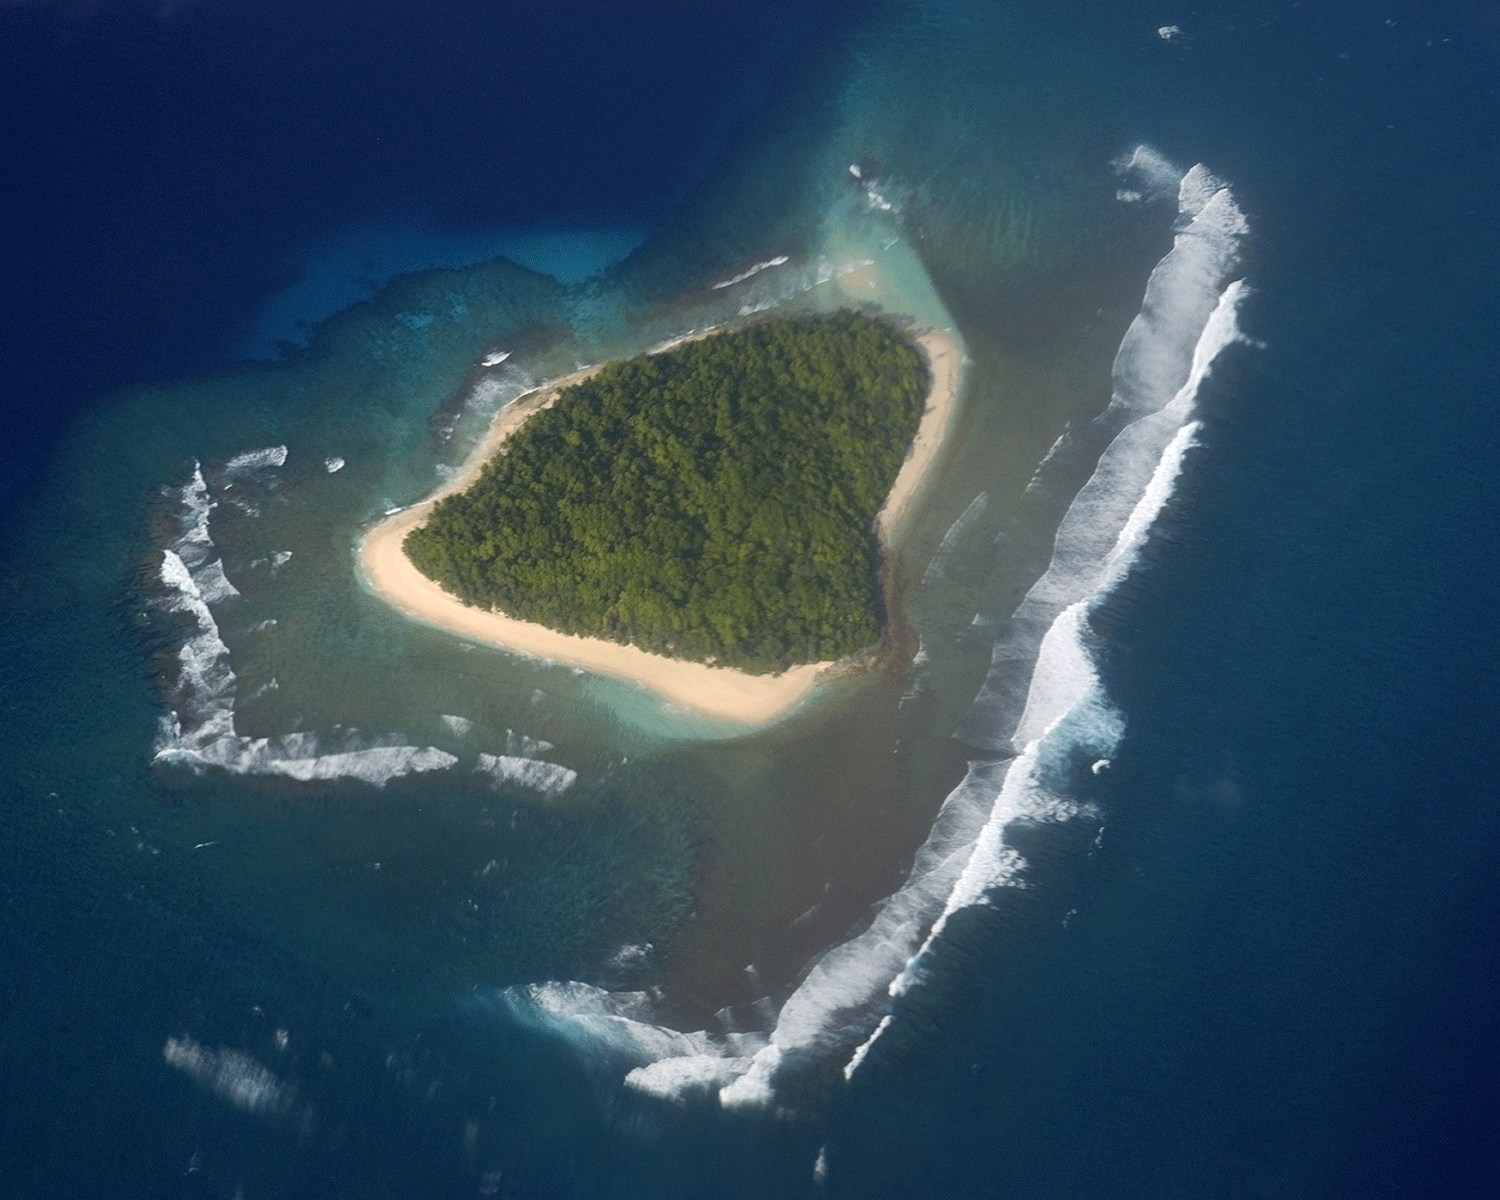 One of the islands, Kuwajelein, of the Marshall Islands, where 67 nuclear tests harmed the local population during the 50s and 60s